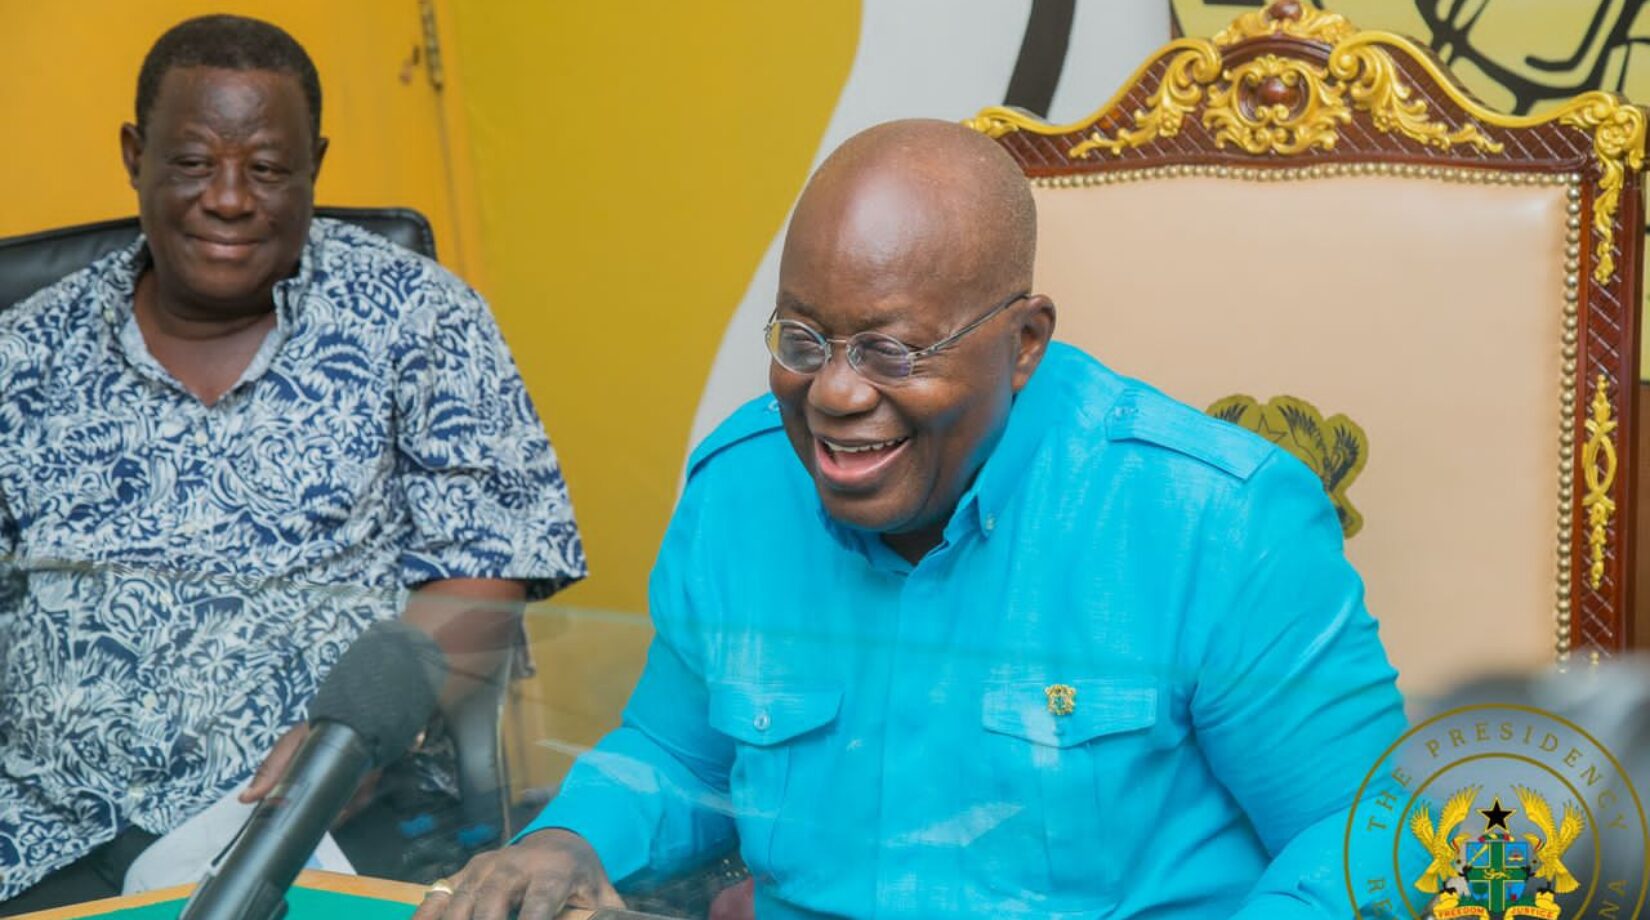 “IMF PROGRAMME WILL NOT AFFECT FREE SHS, PRO-POOR POLICIES” – NANA ADDO ASSURES